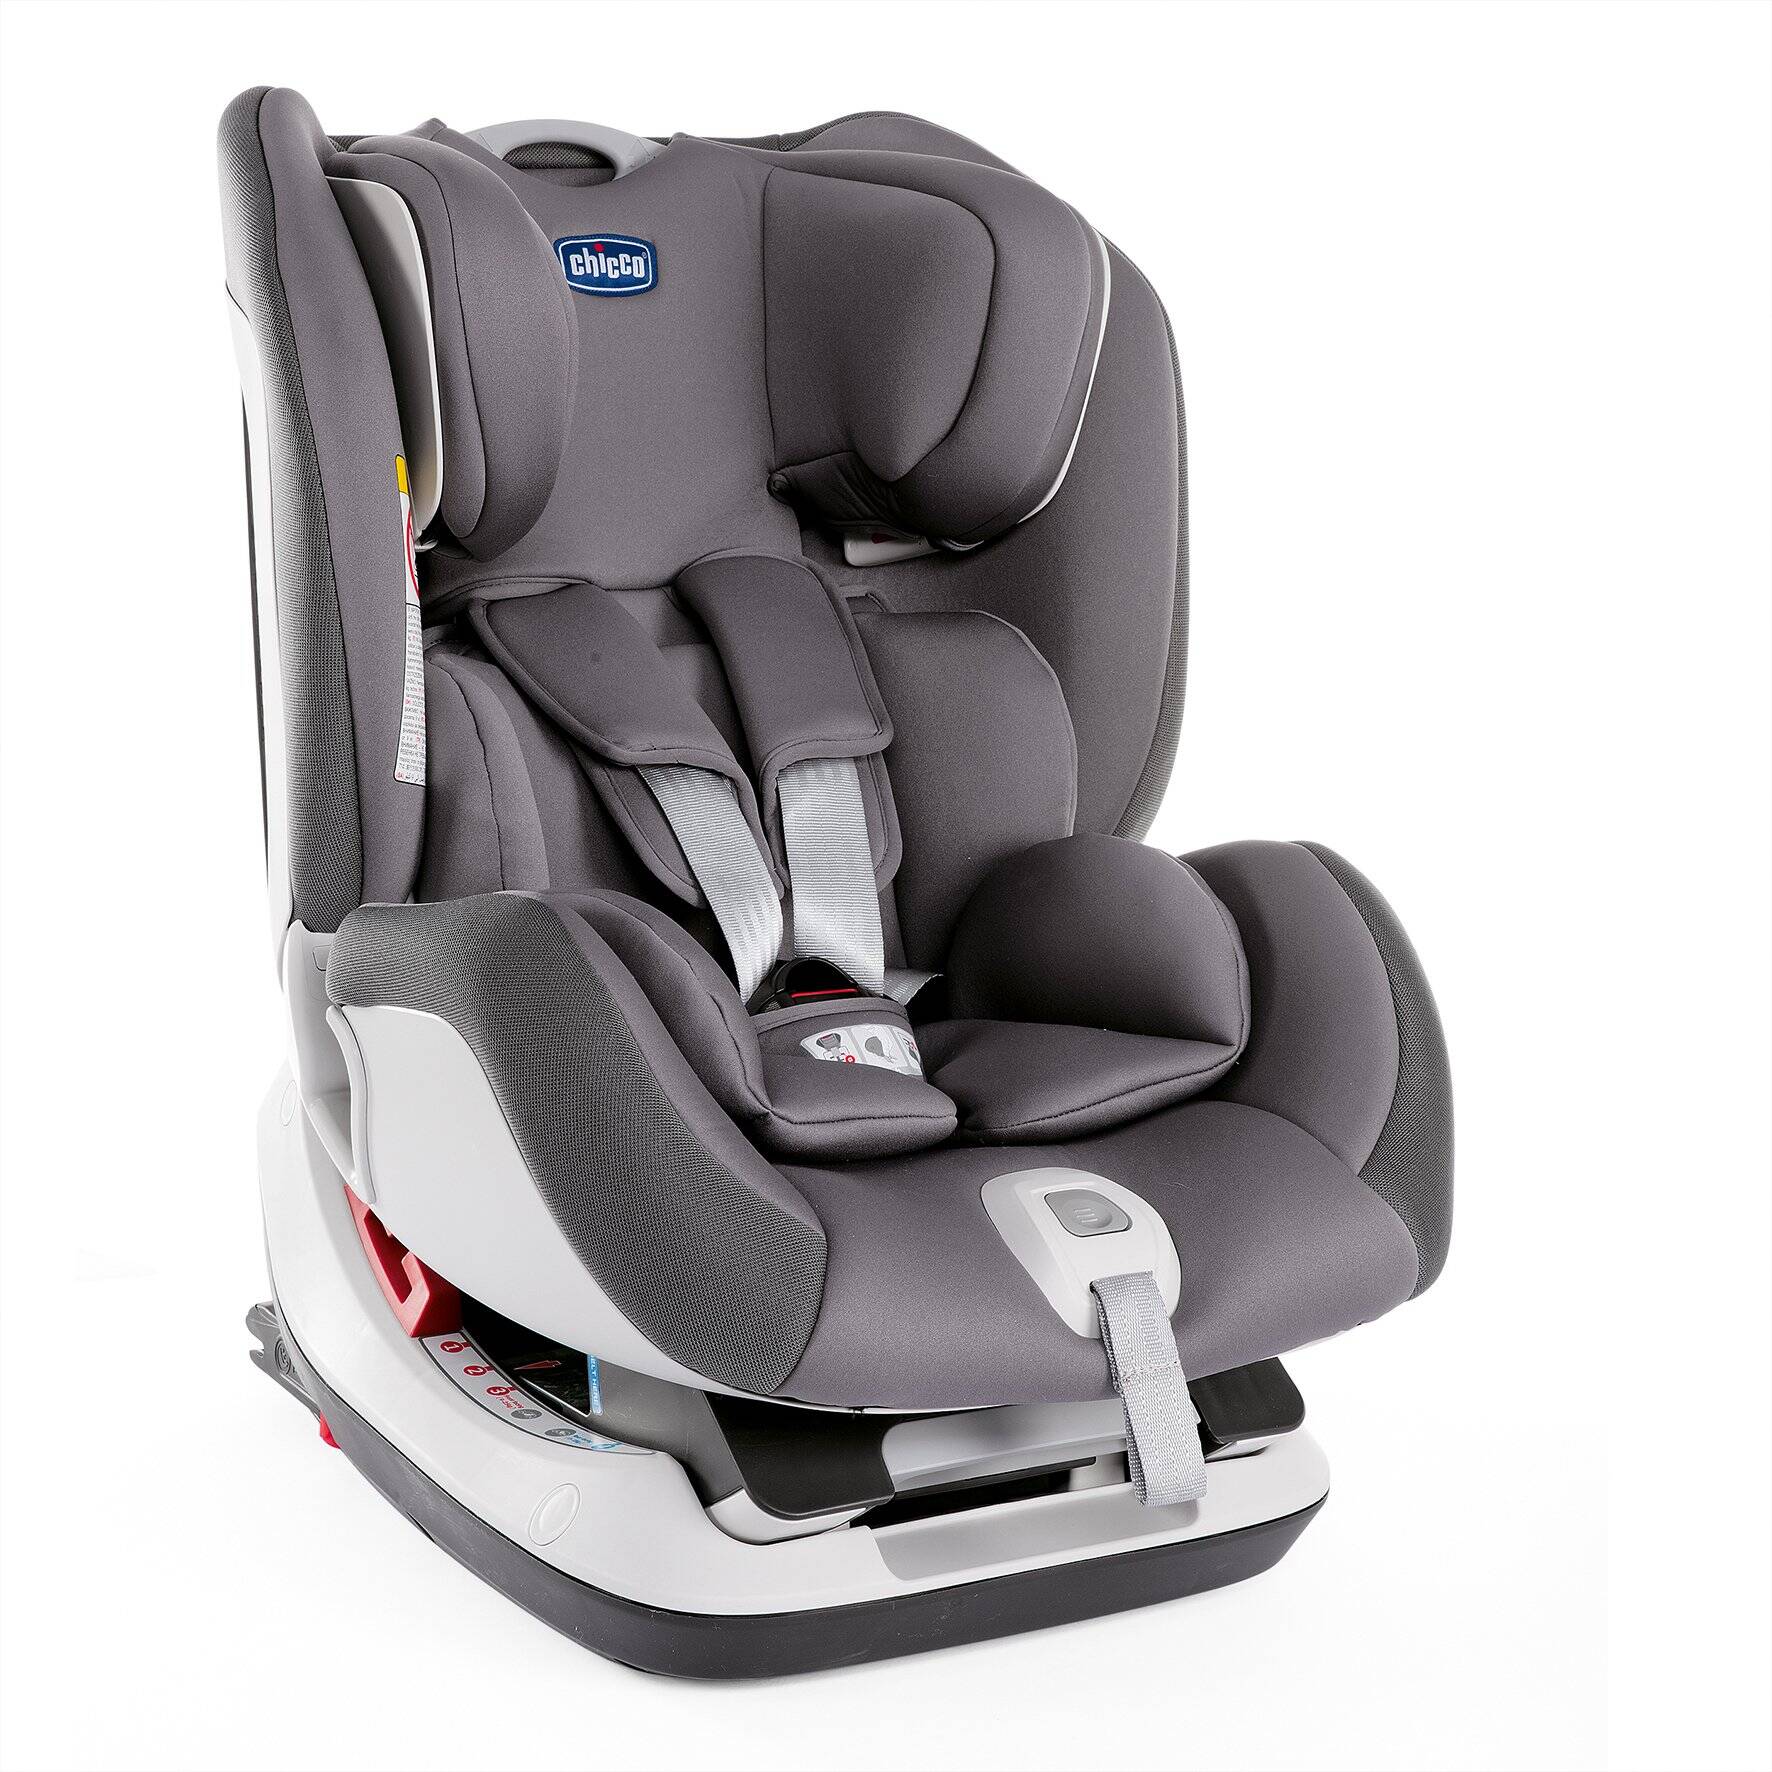 How to buy the best child Booster seat